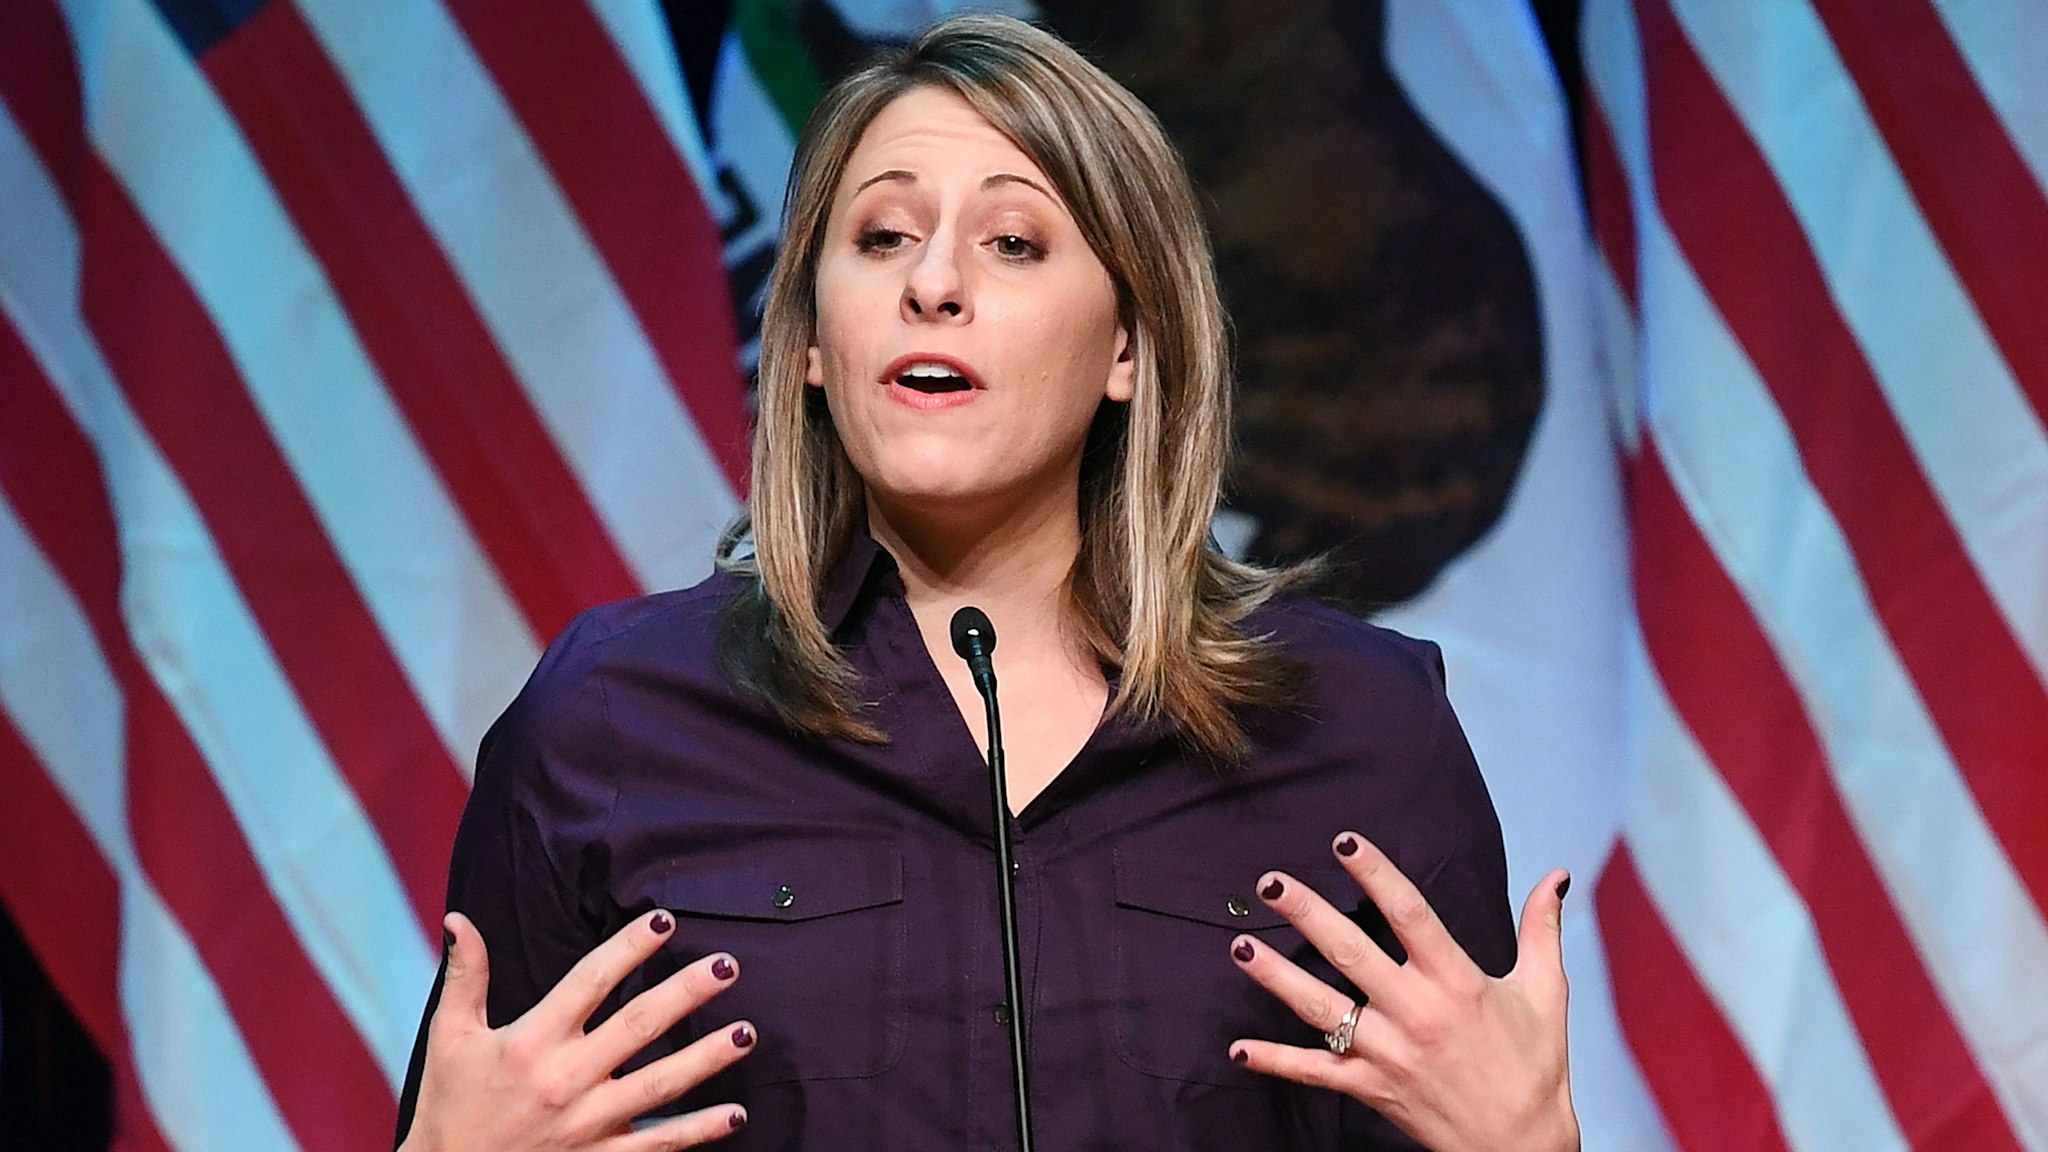 Democrat Katie Hill who is running for Congress in California's 25th District, speaks at a campaign rally before the mid-term elections in Santa Clarita, California on November 3, 2018. - She will run against Republican incumbent Steve Knight